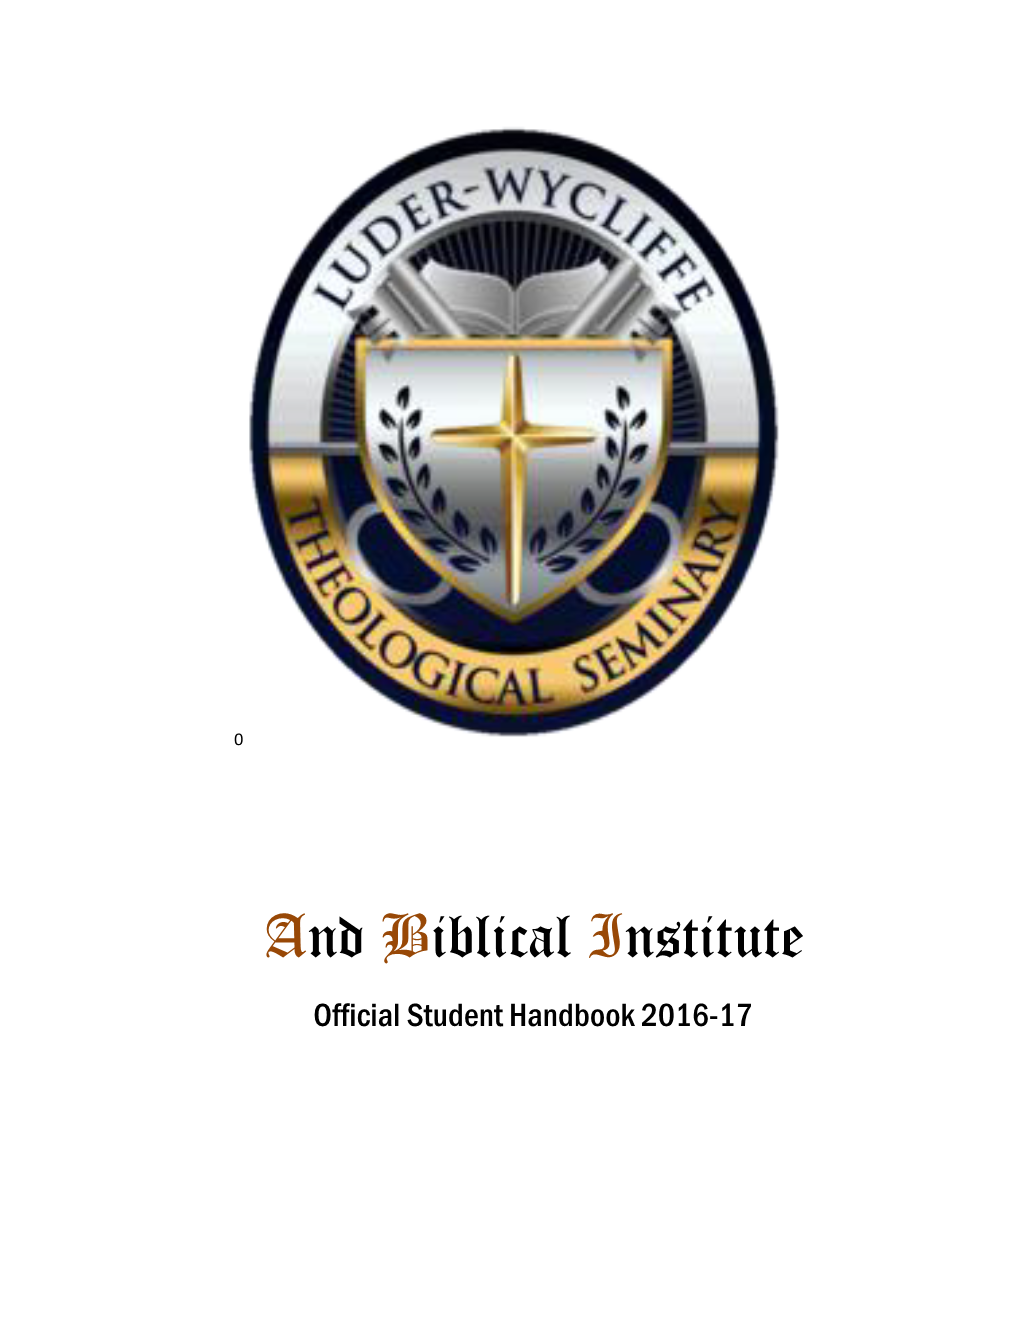 And Biblical Institute Official Student Handbook 2016-17